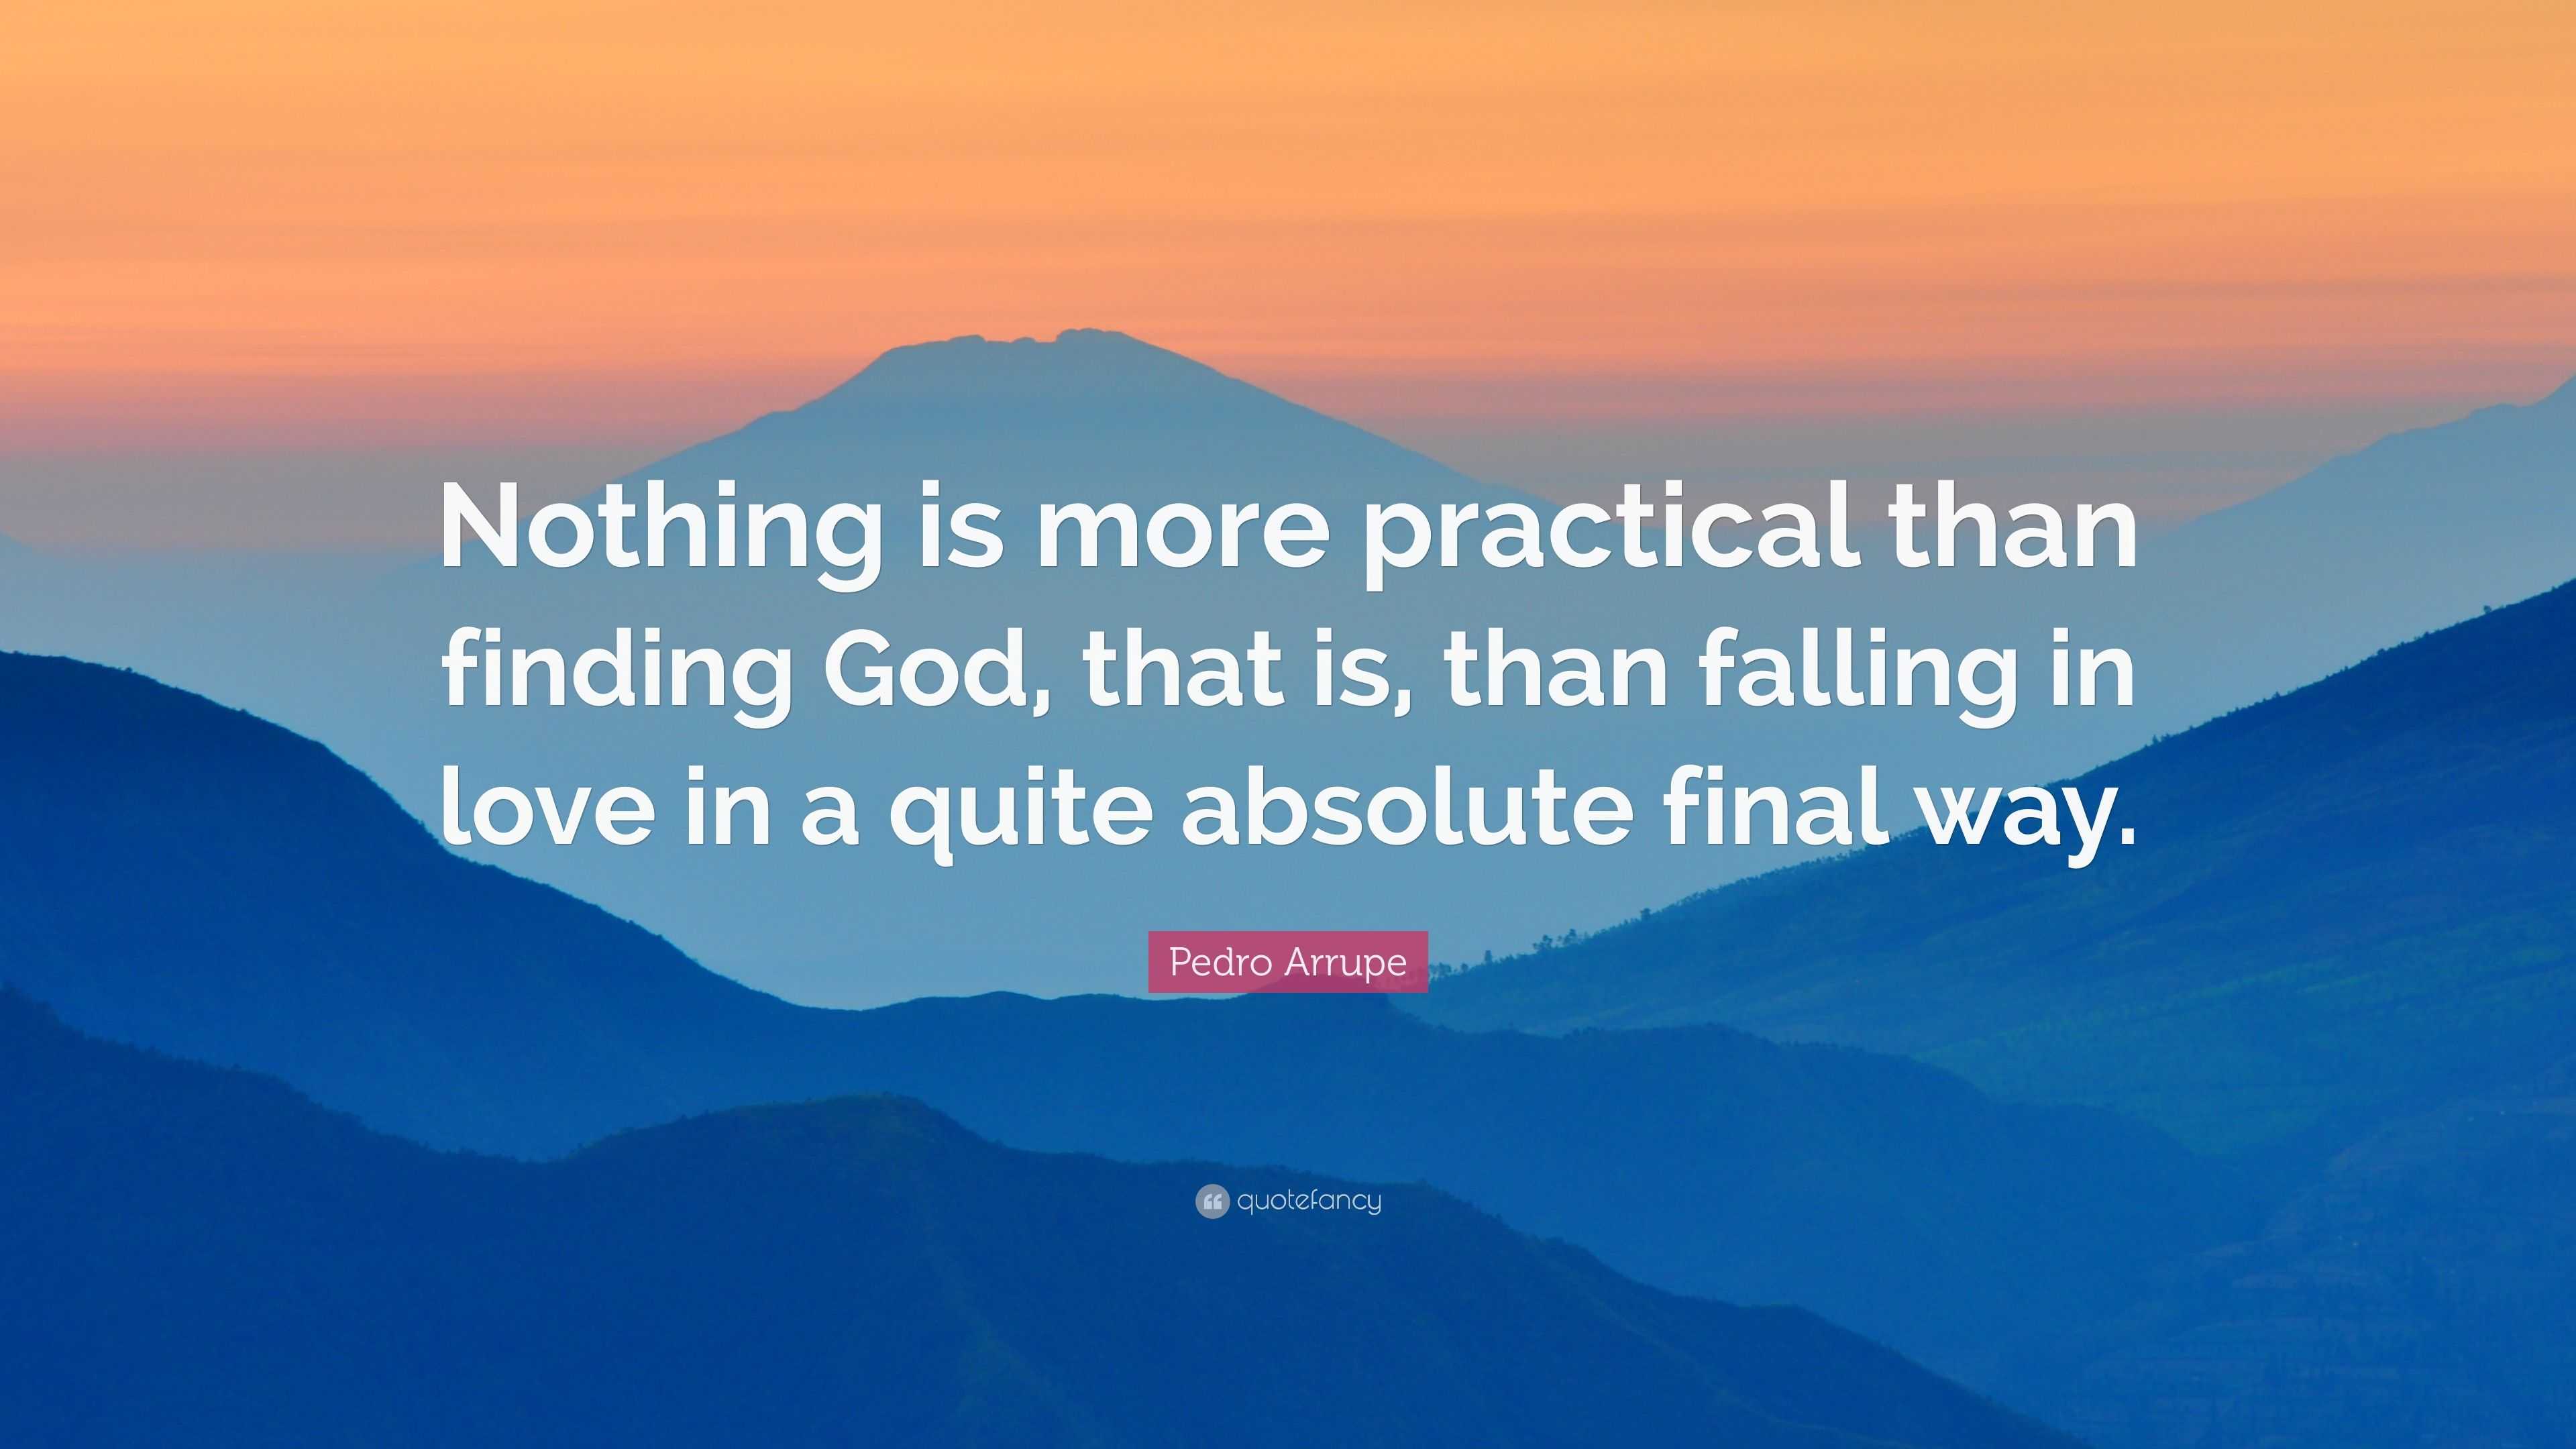 Pedro Arrupe Quote: “Nothing is more practical than finding God, that